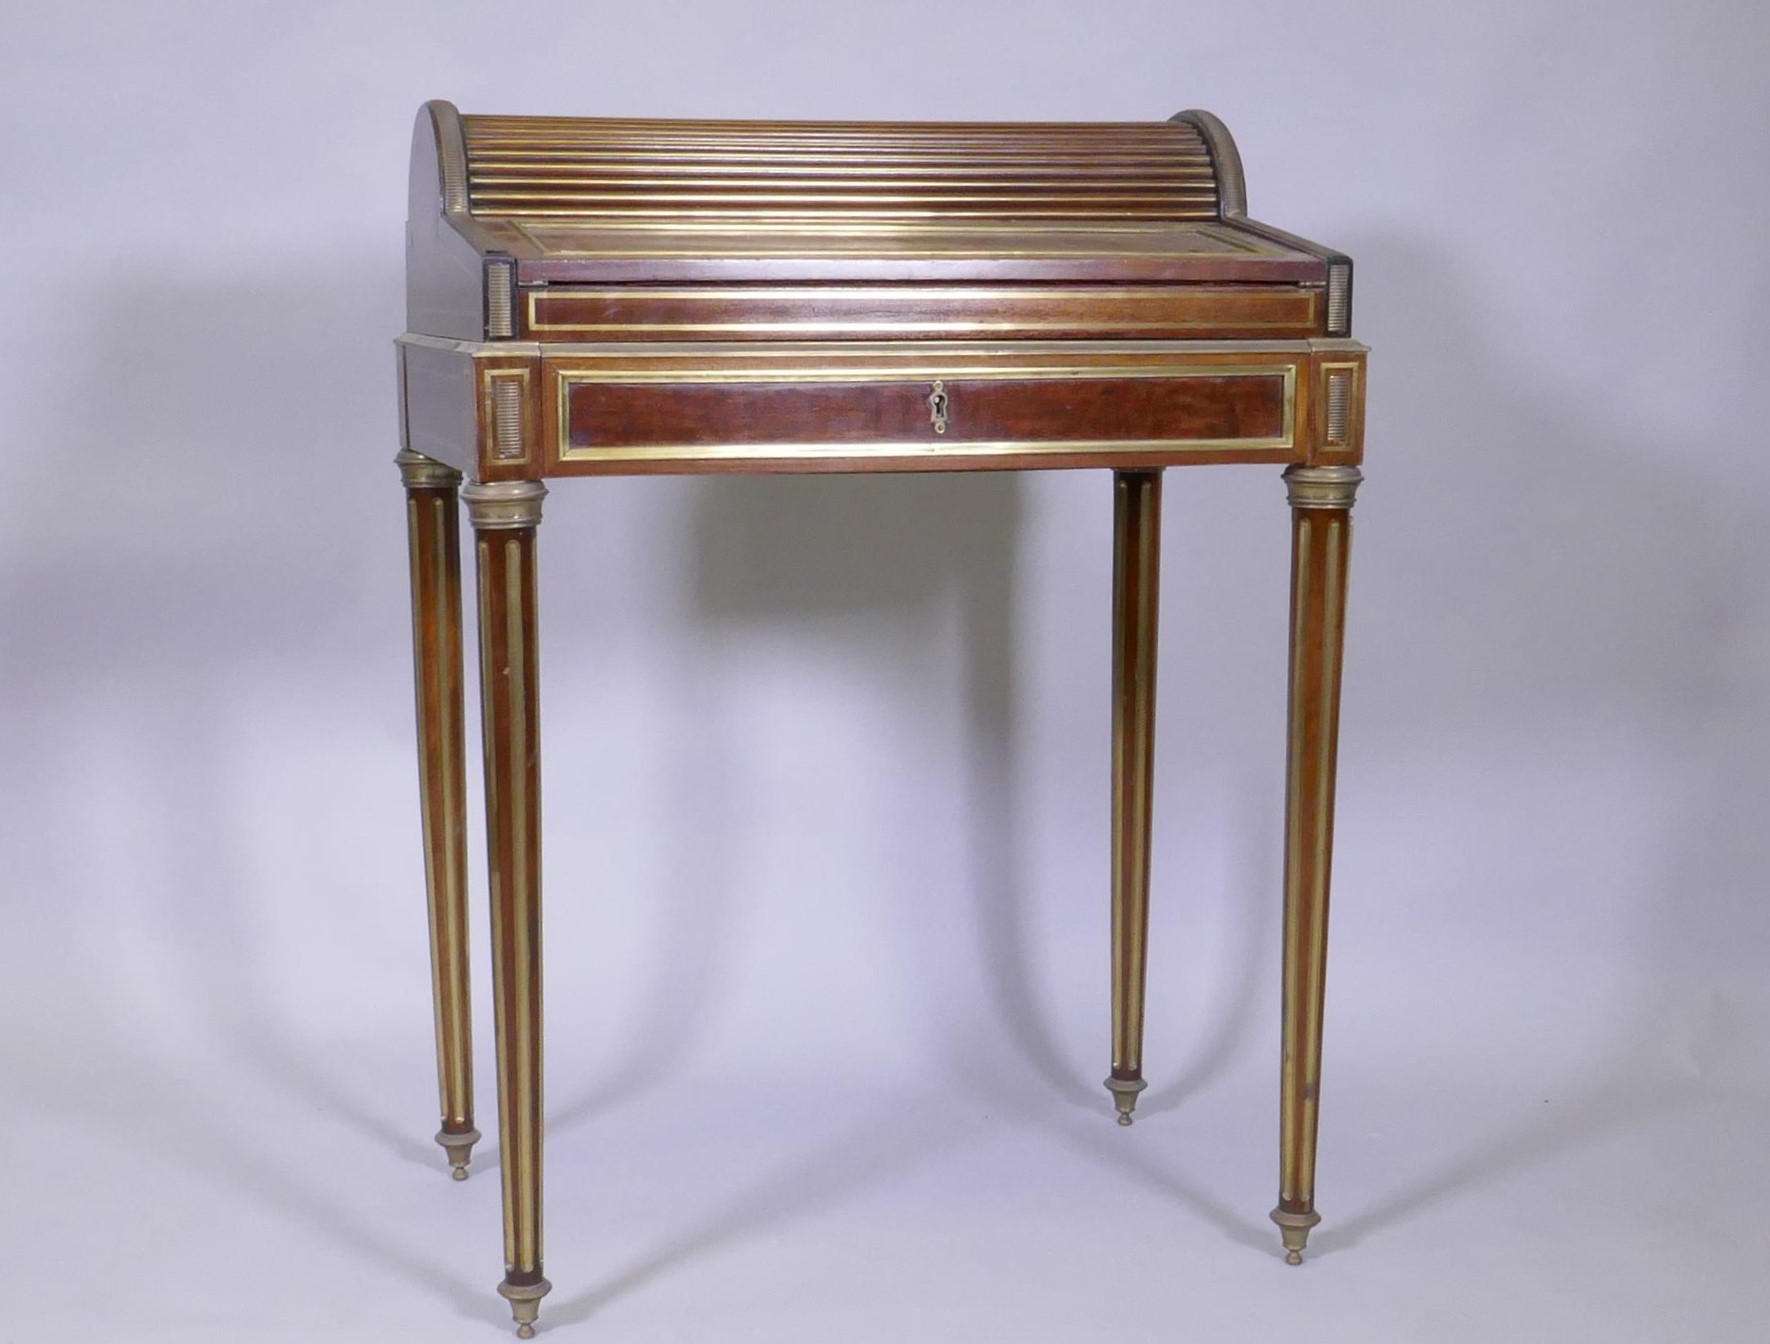 A French mahogany bonne heure du jour, with brass mounts, the pull out drawer operating the